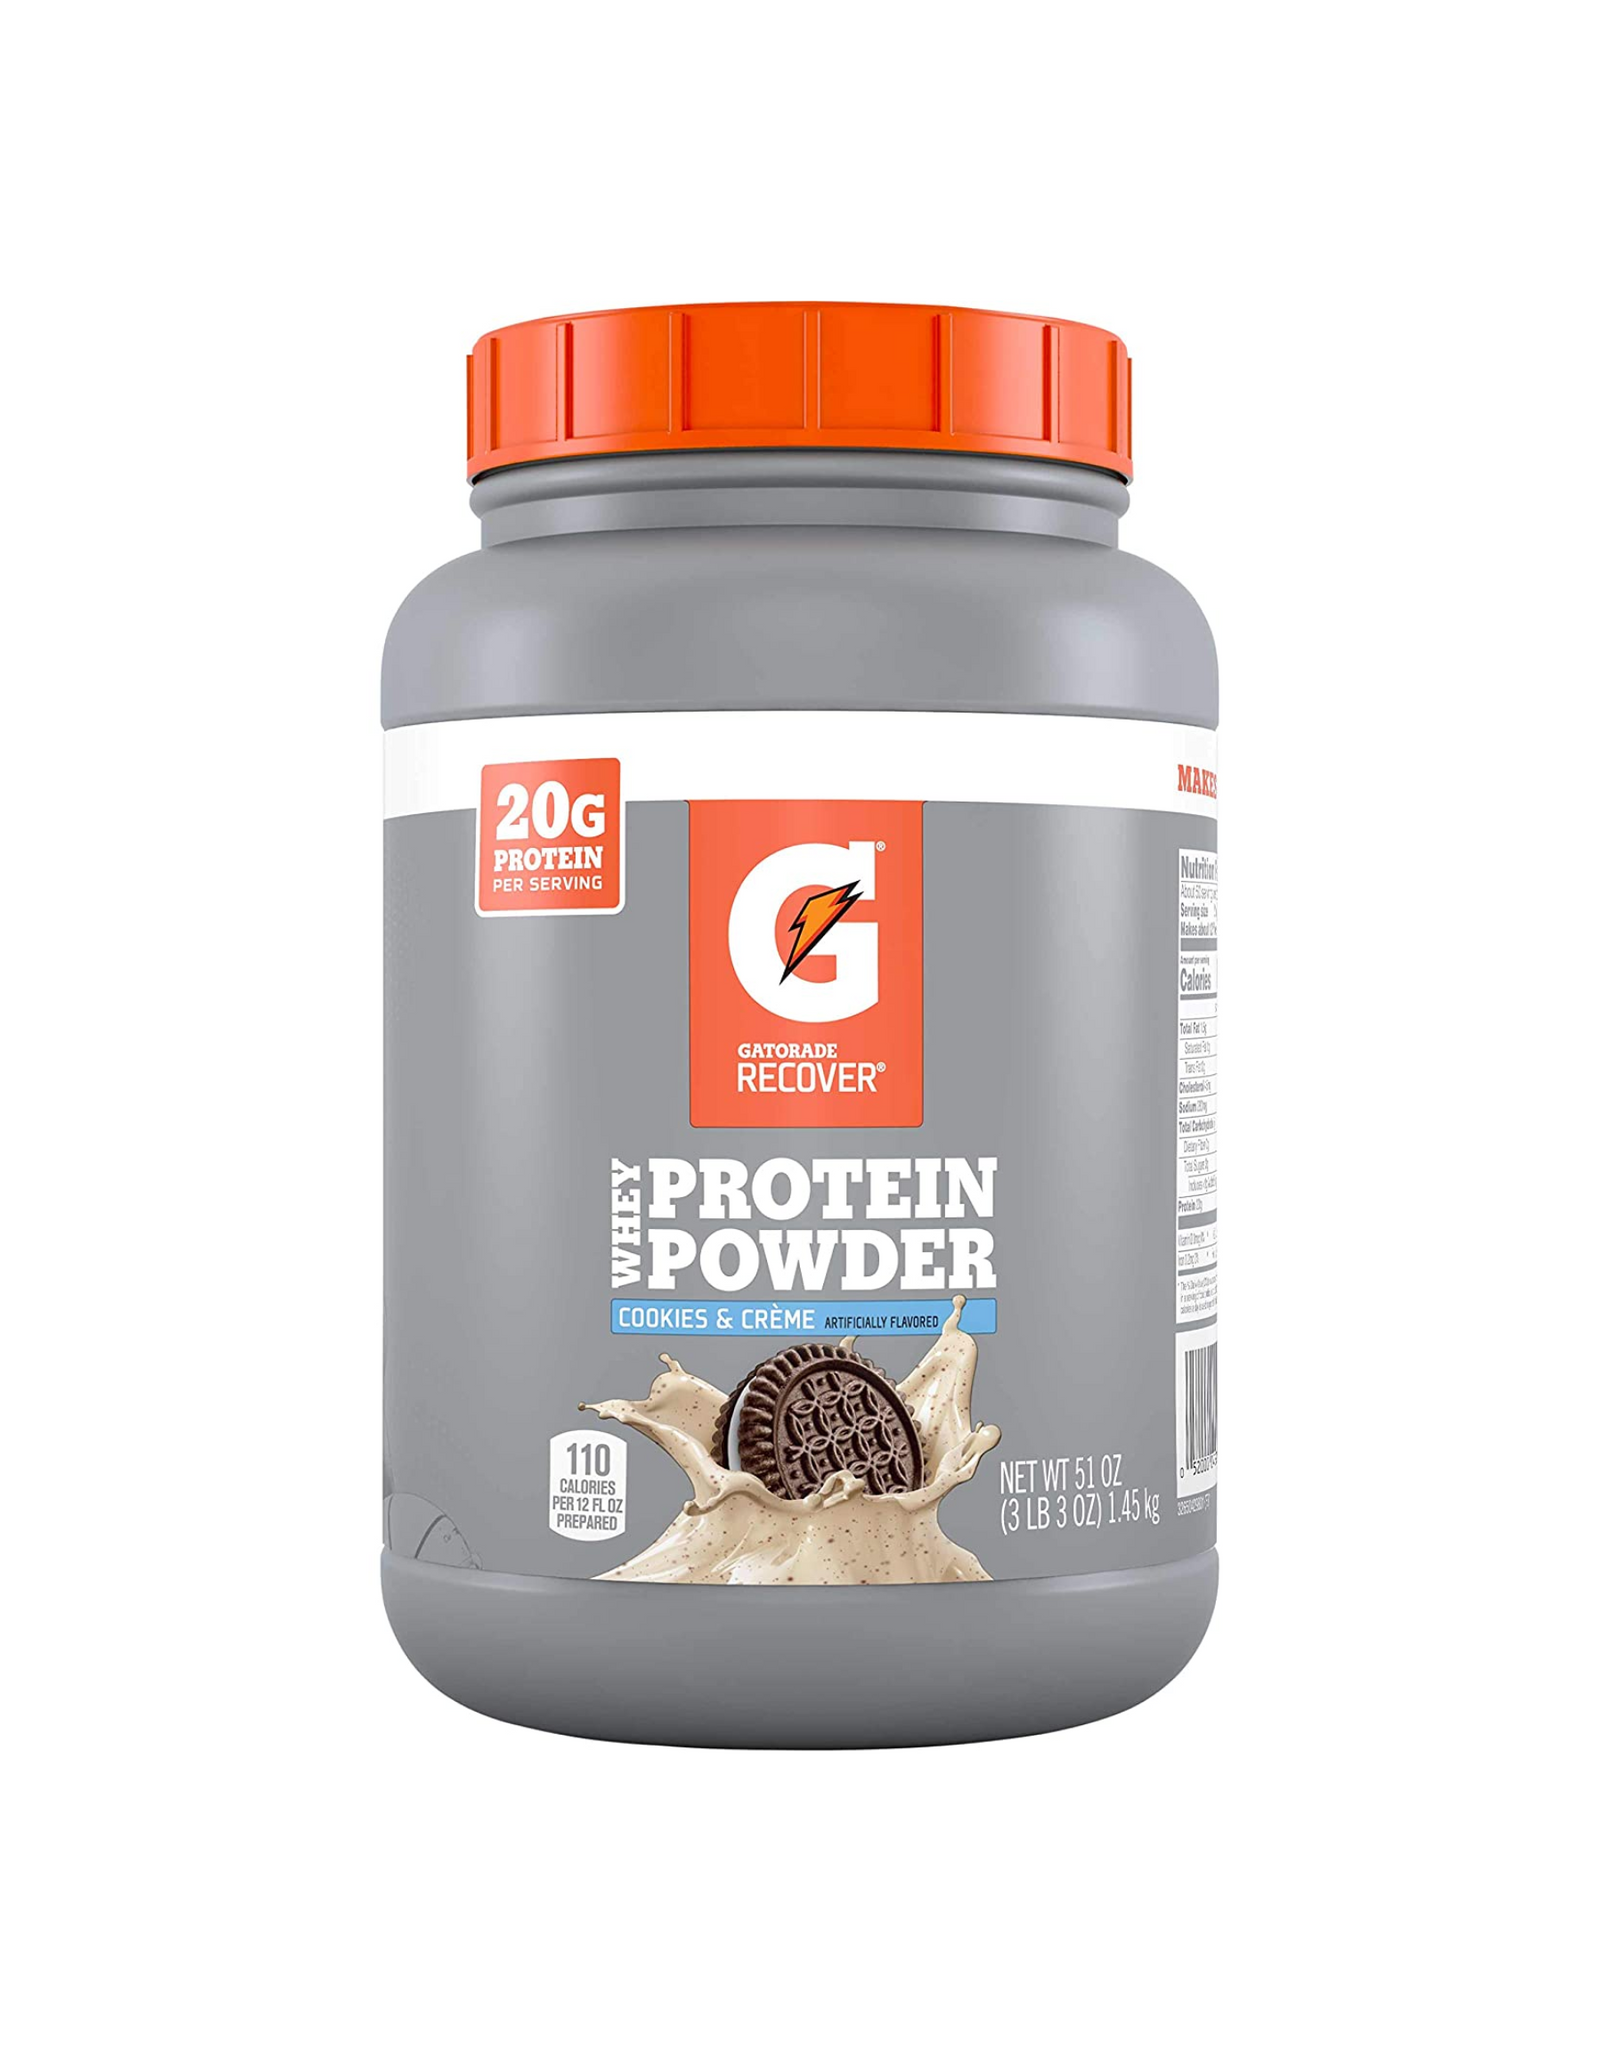 Gatorade Whey Protein Powder with 20g of Protein, Cookies & Cream, 50 Servings, 56 oz (Pack of 1)